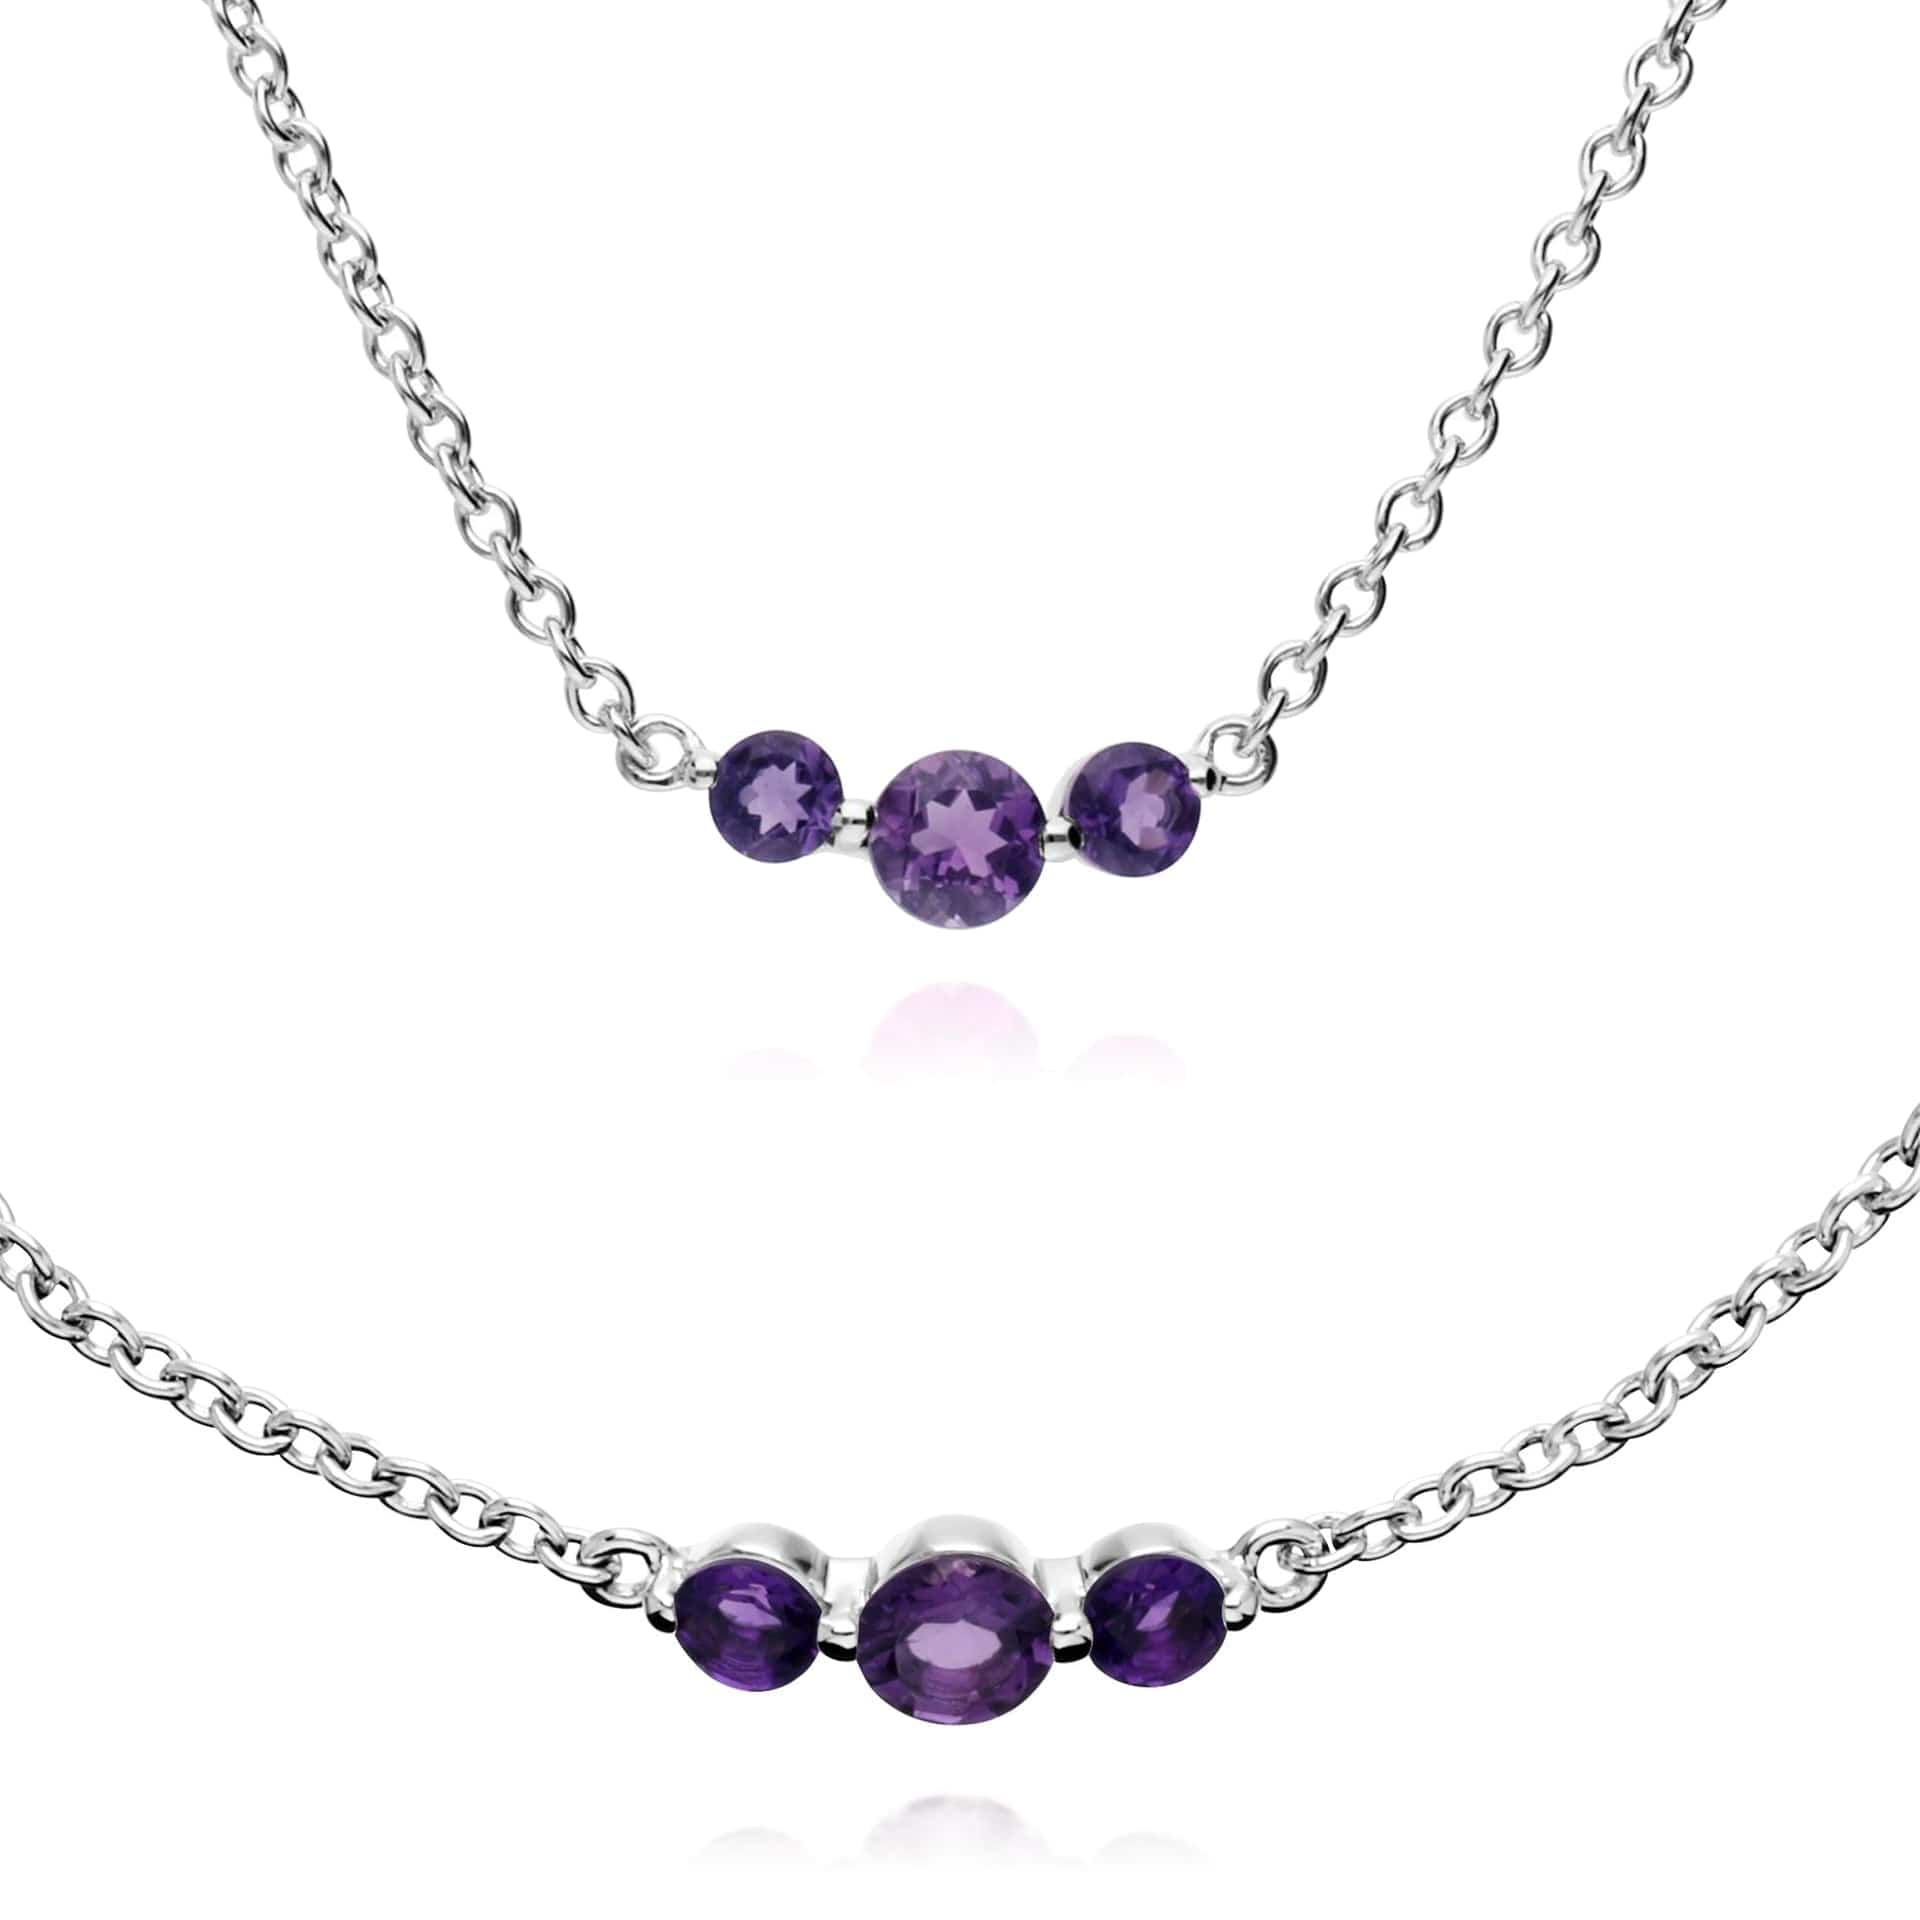 270N034203925-270L011103925 Classic Round Amethyst Three Stone Gradient Bracelet & Necklace Set in 925 Sterling Silver 1